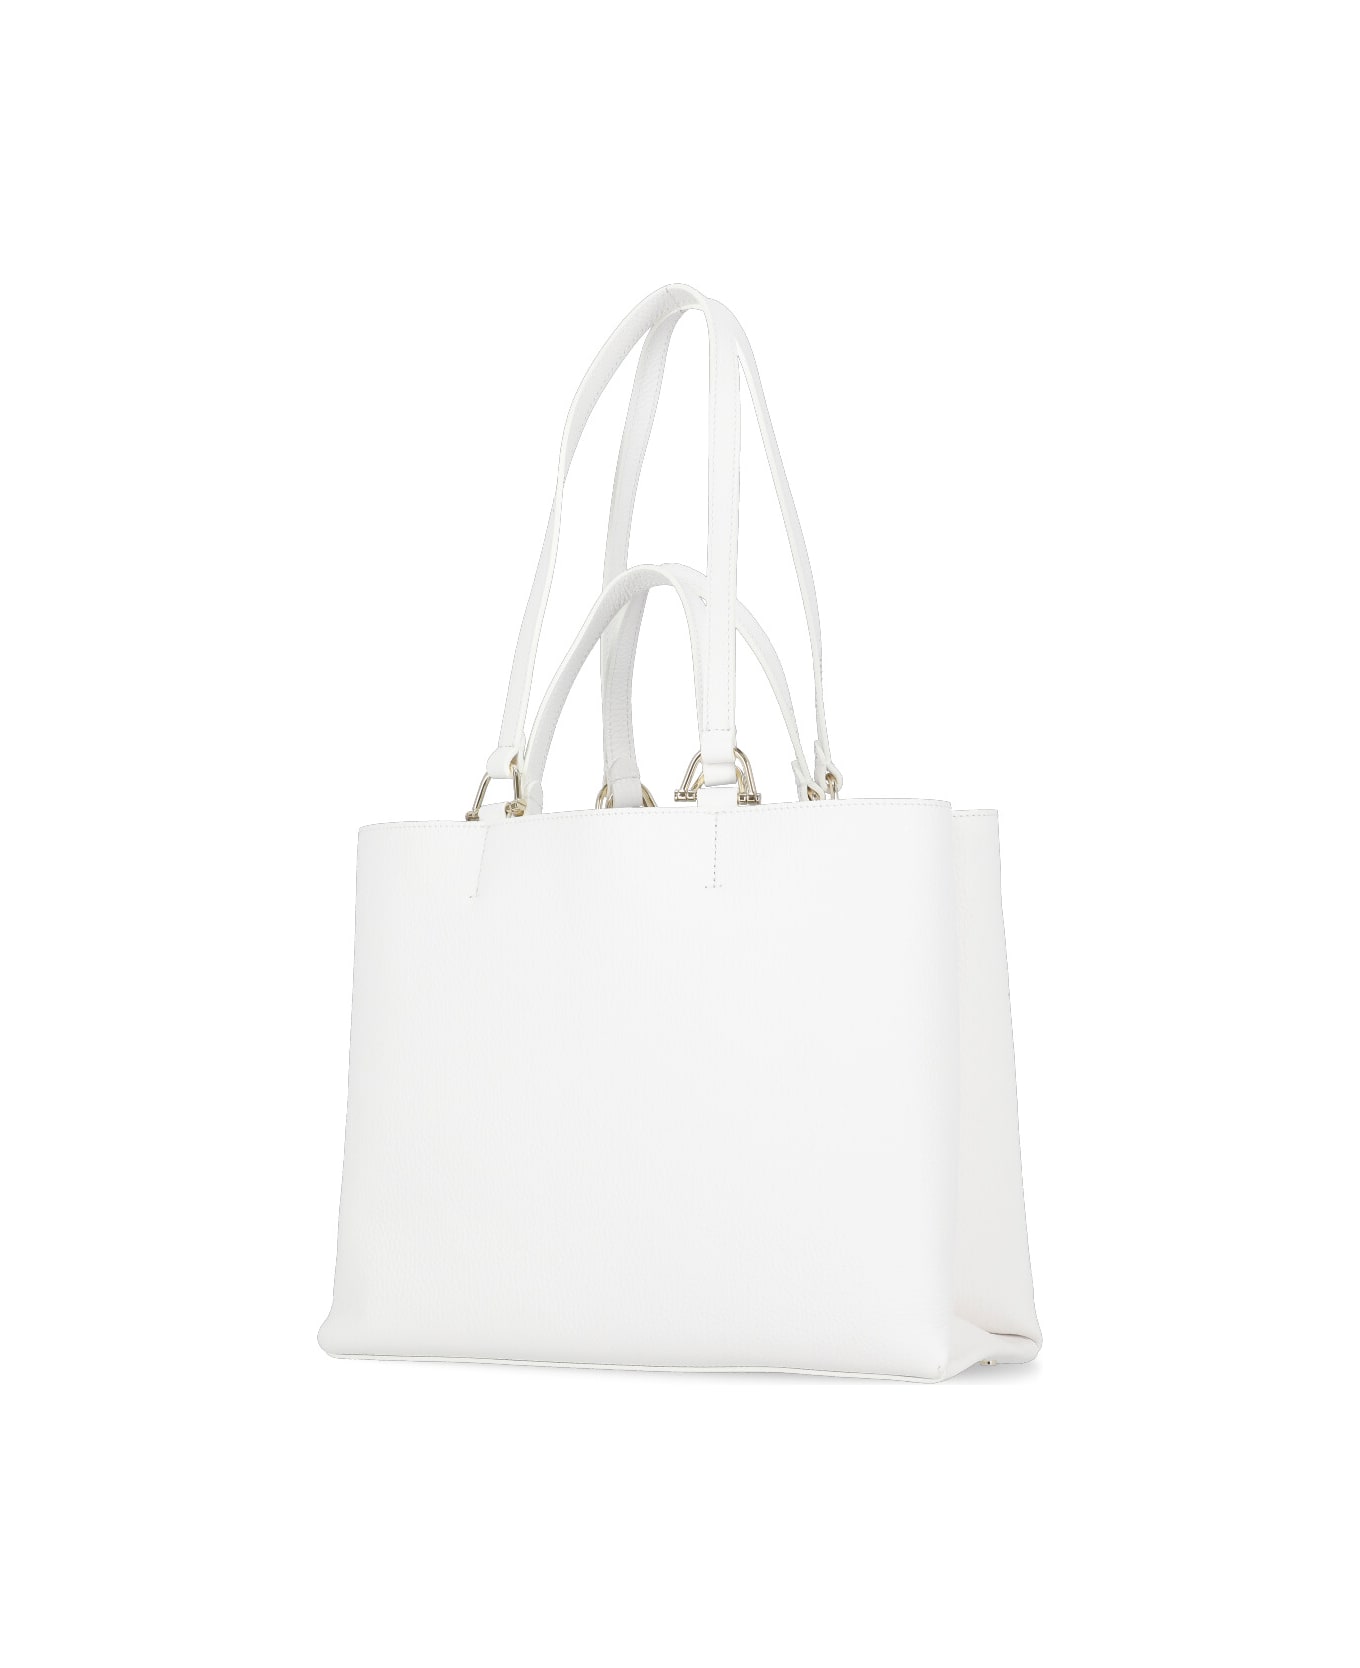 Coccinelle Hop On Bag - White トートバッグ